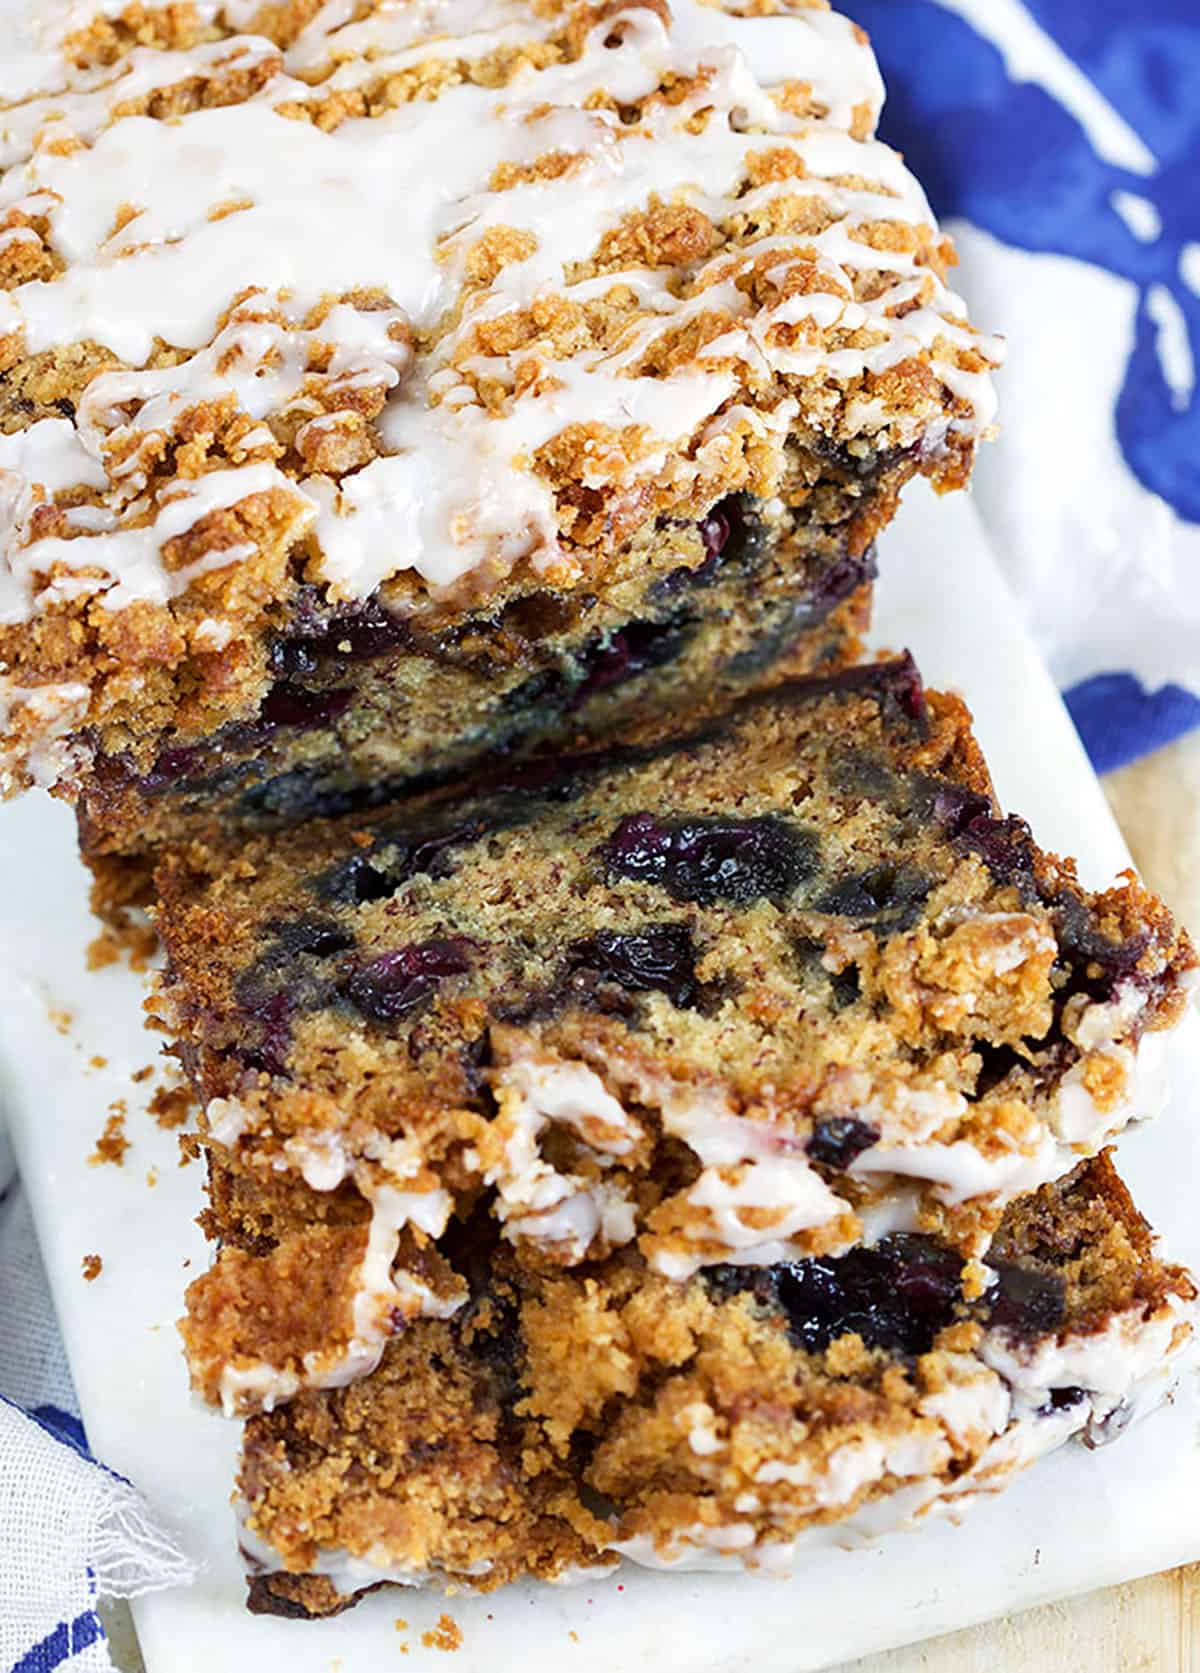 Blueberry Banana Bread with streusel and glaze sliced on a marble board with a blue napkin